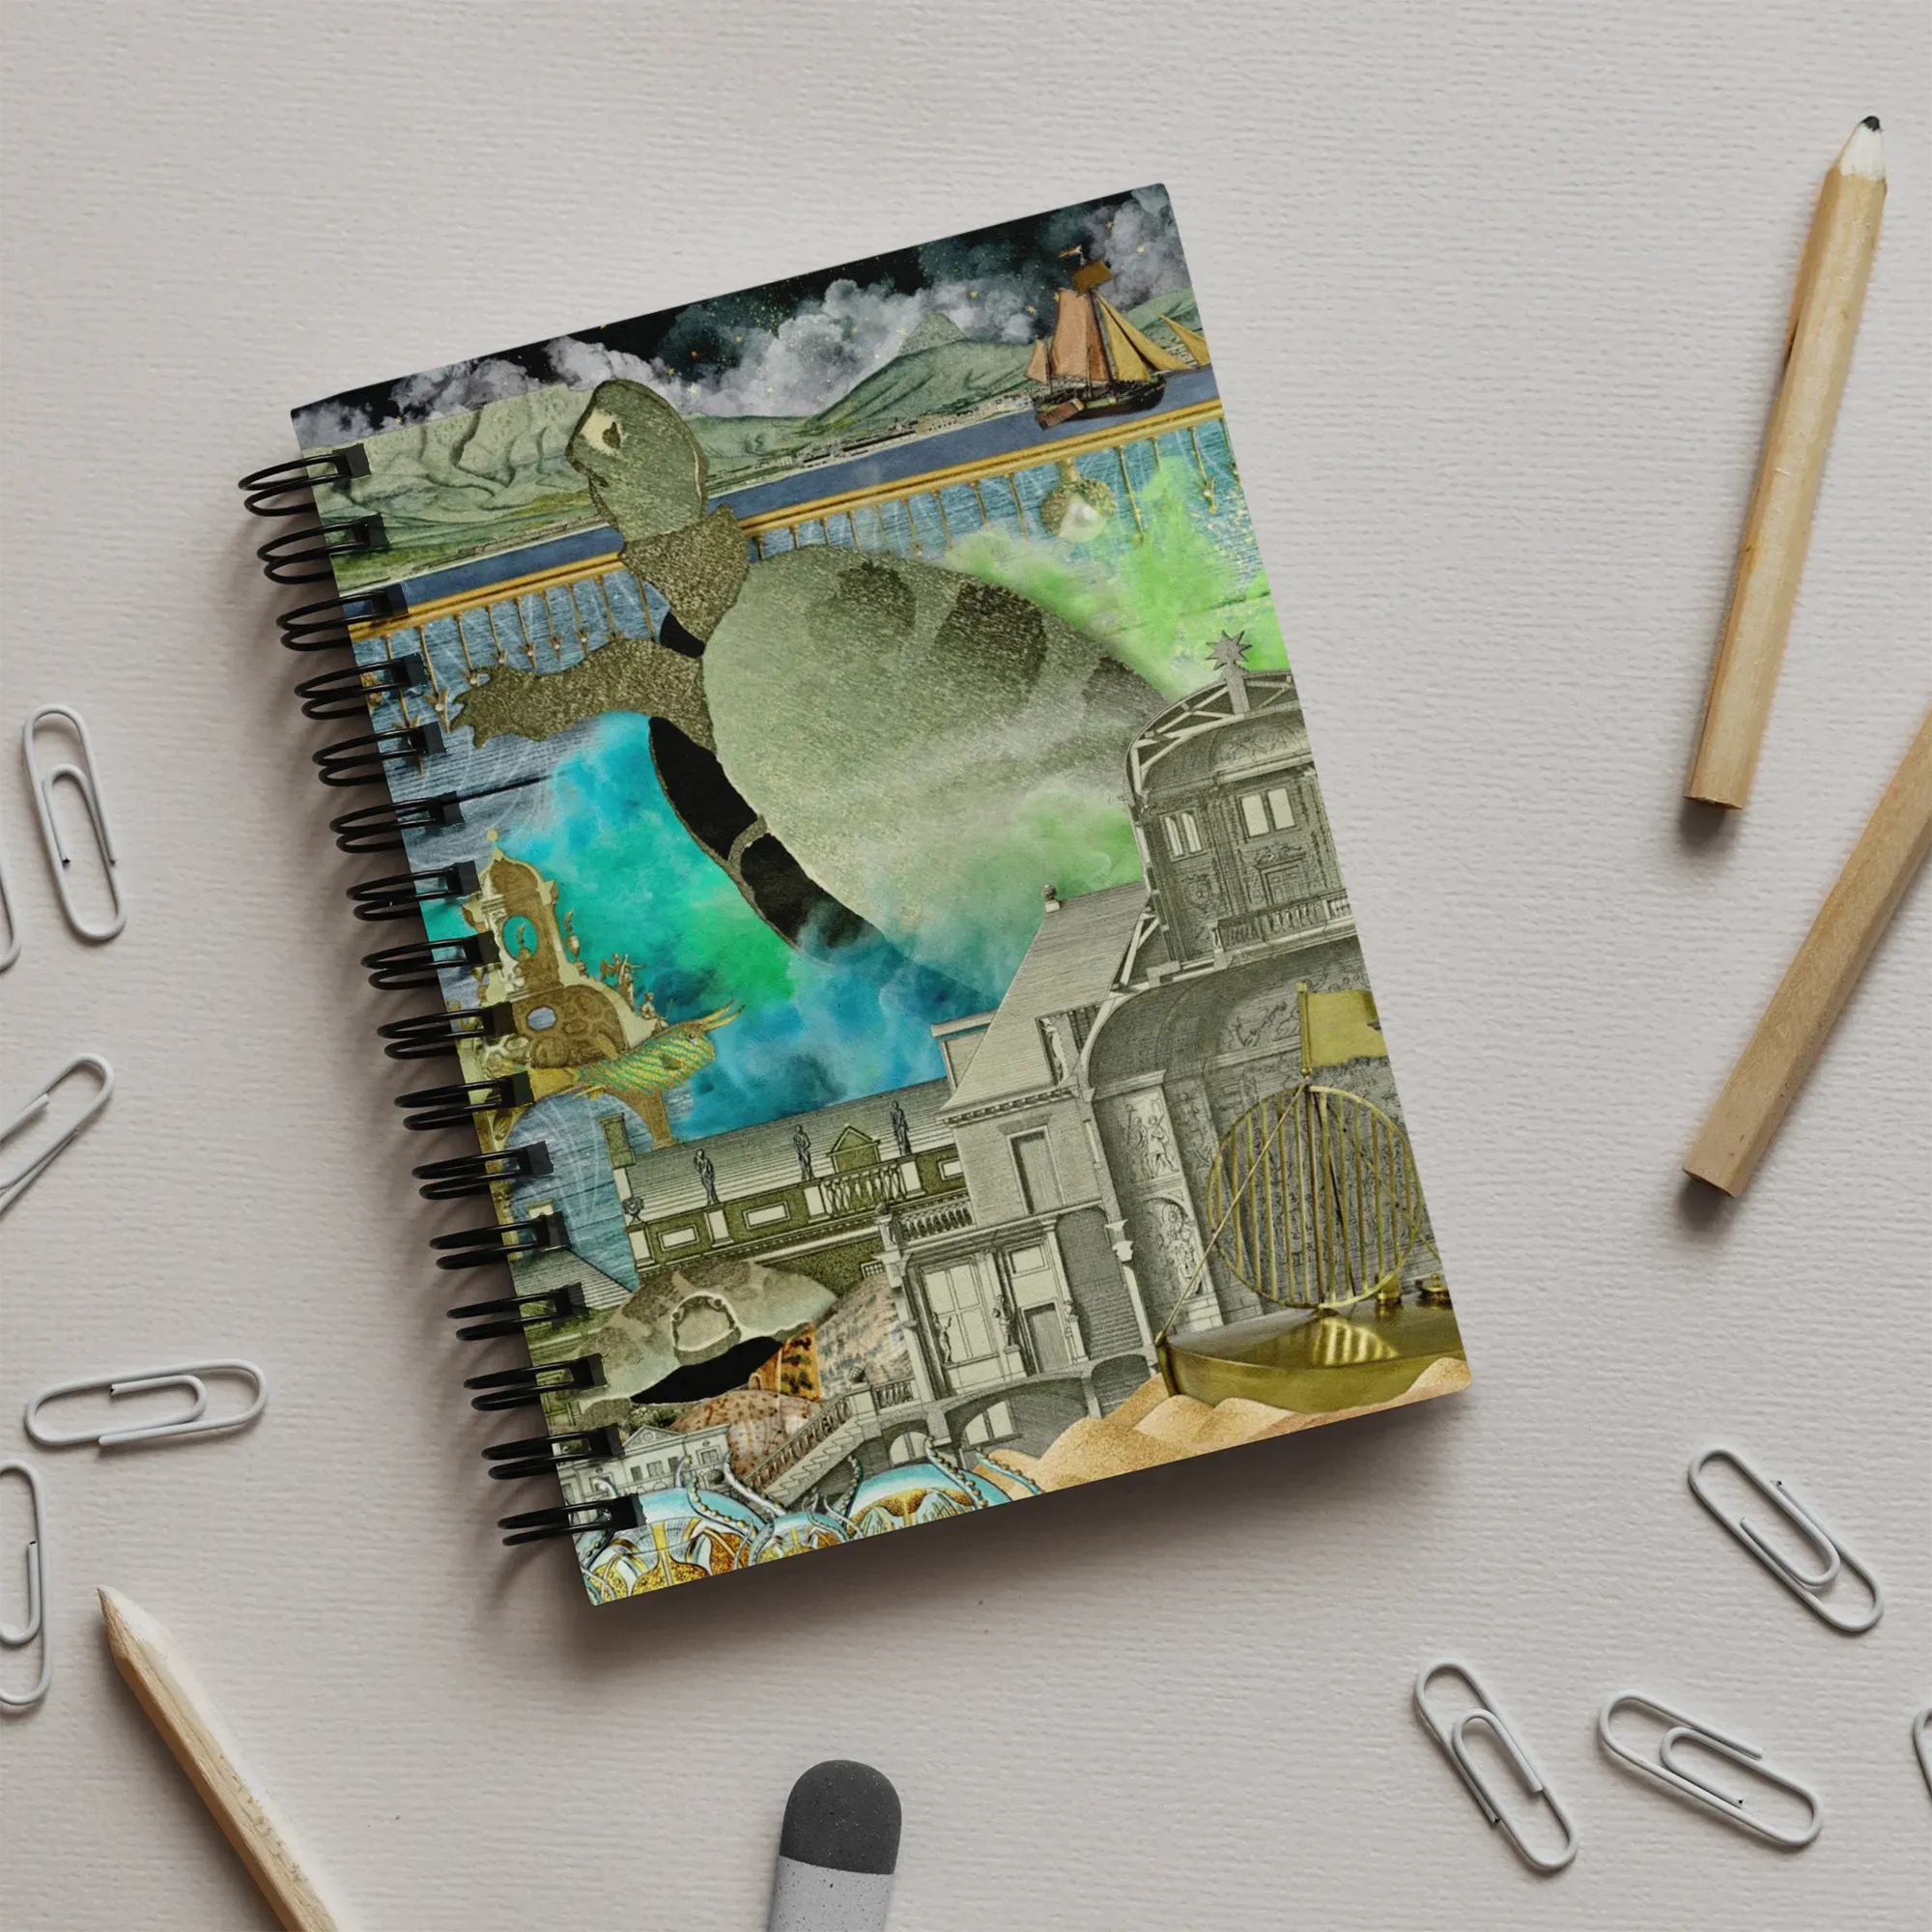 Down Where It’s Wetter Part 3 Notebook - Aesthetic Art